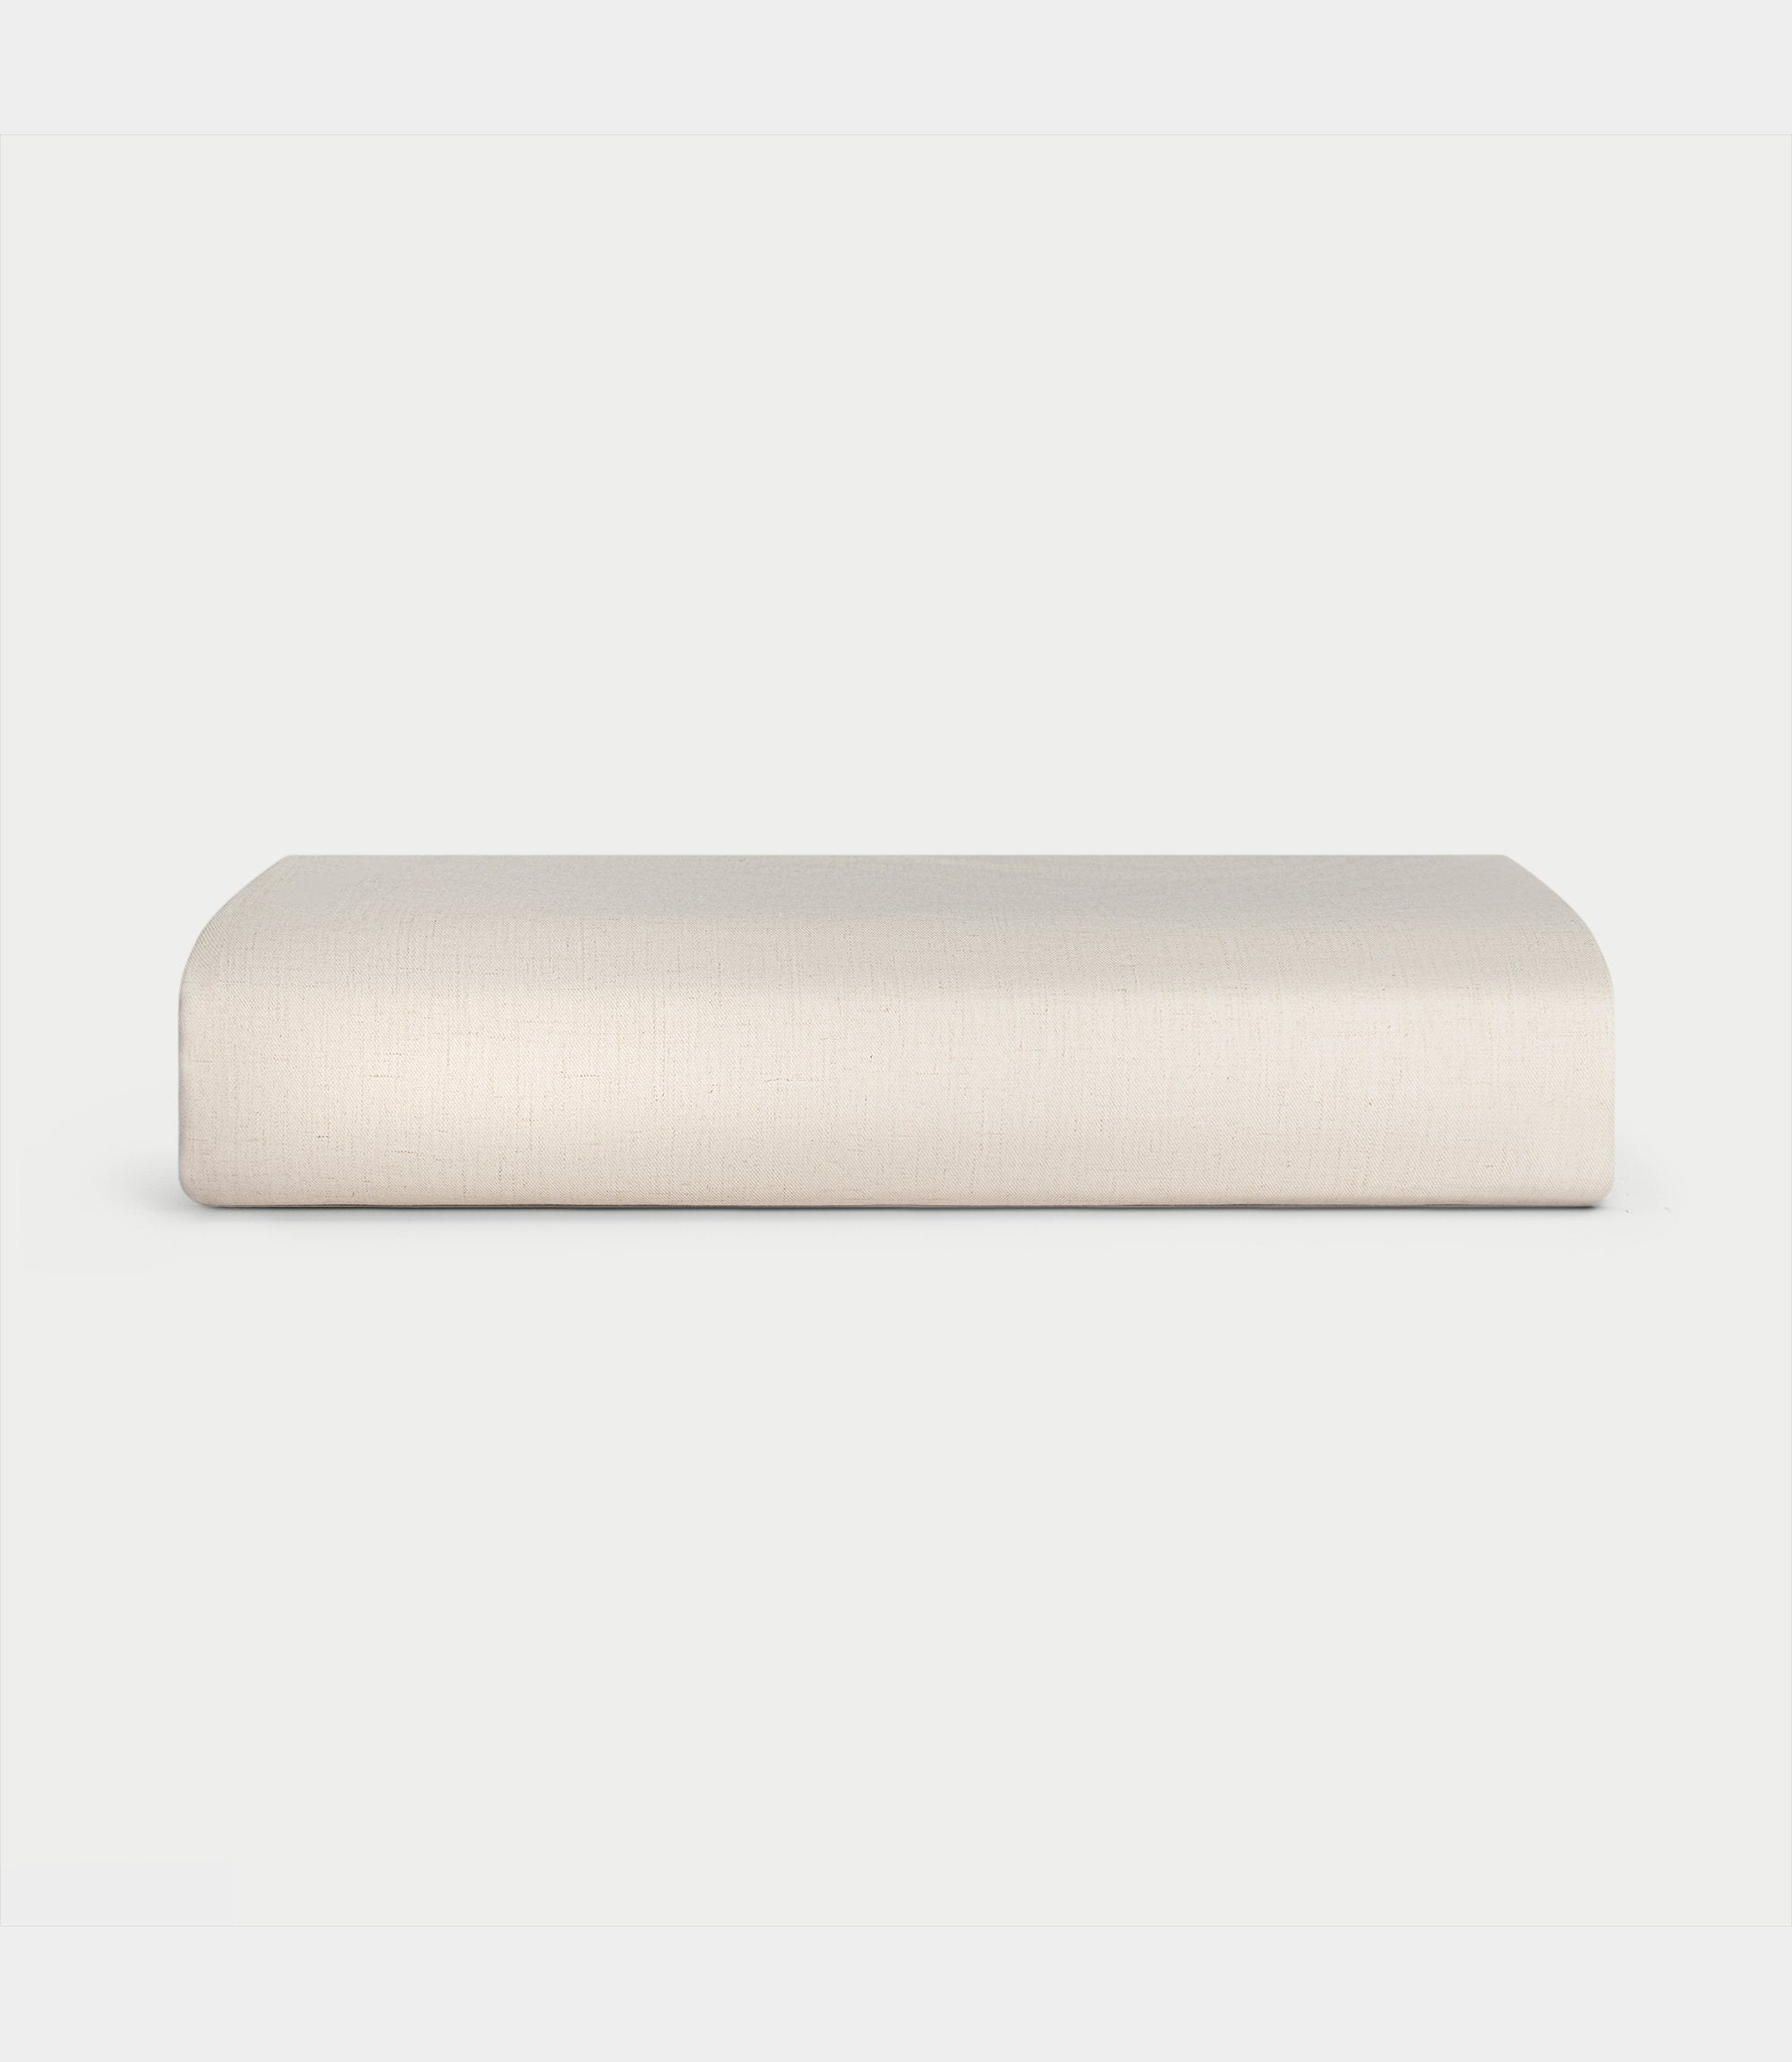 Natural Bamboo Linen Fitted Sheet Folded over a white background. |Color: Natural